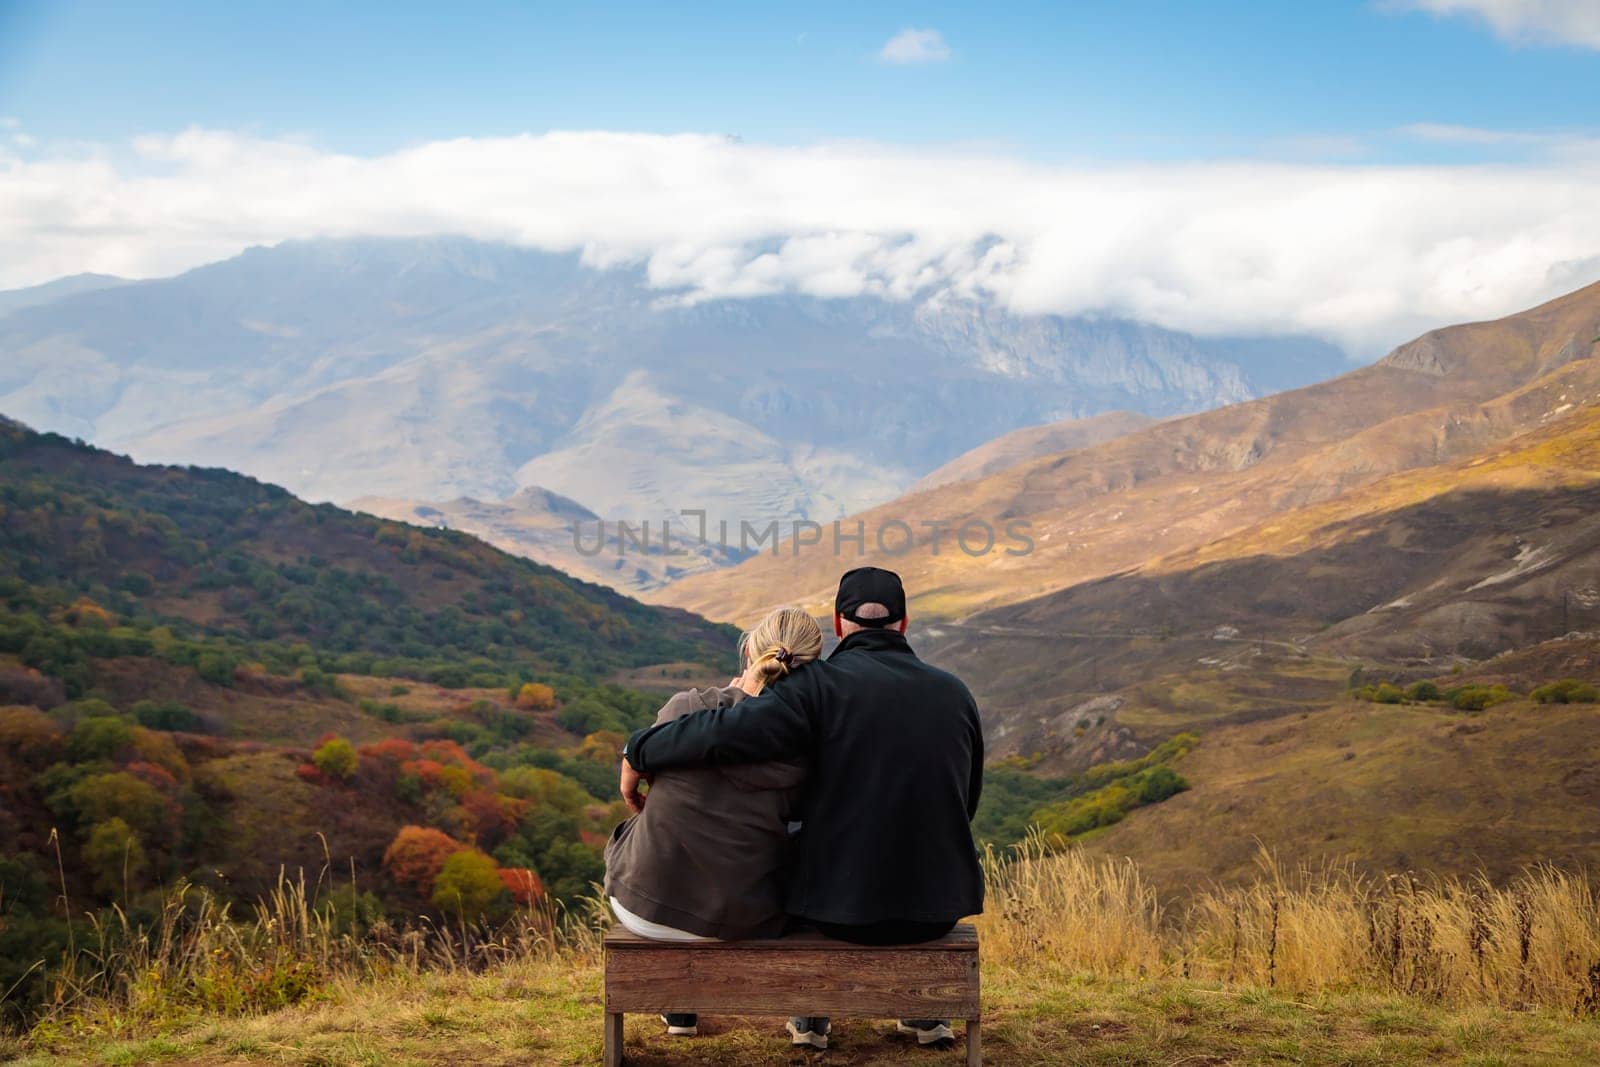 Hugging couple in the mountains enjoying the scenery by Yurich32